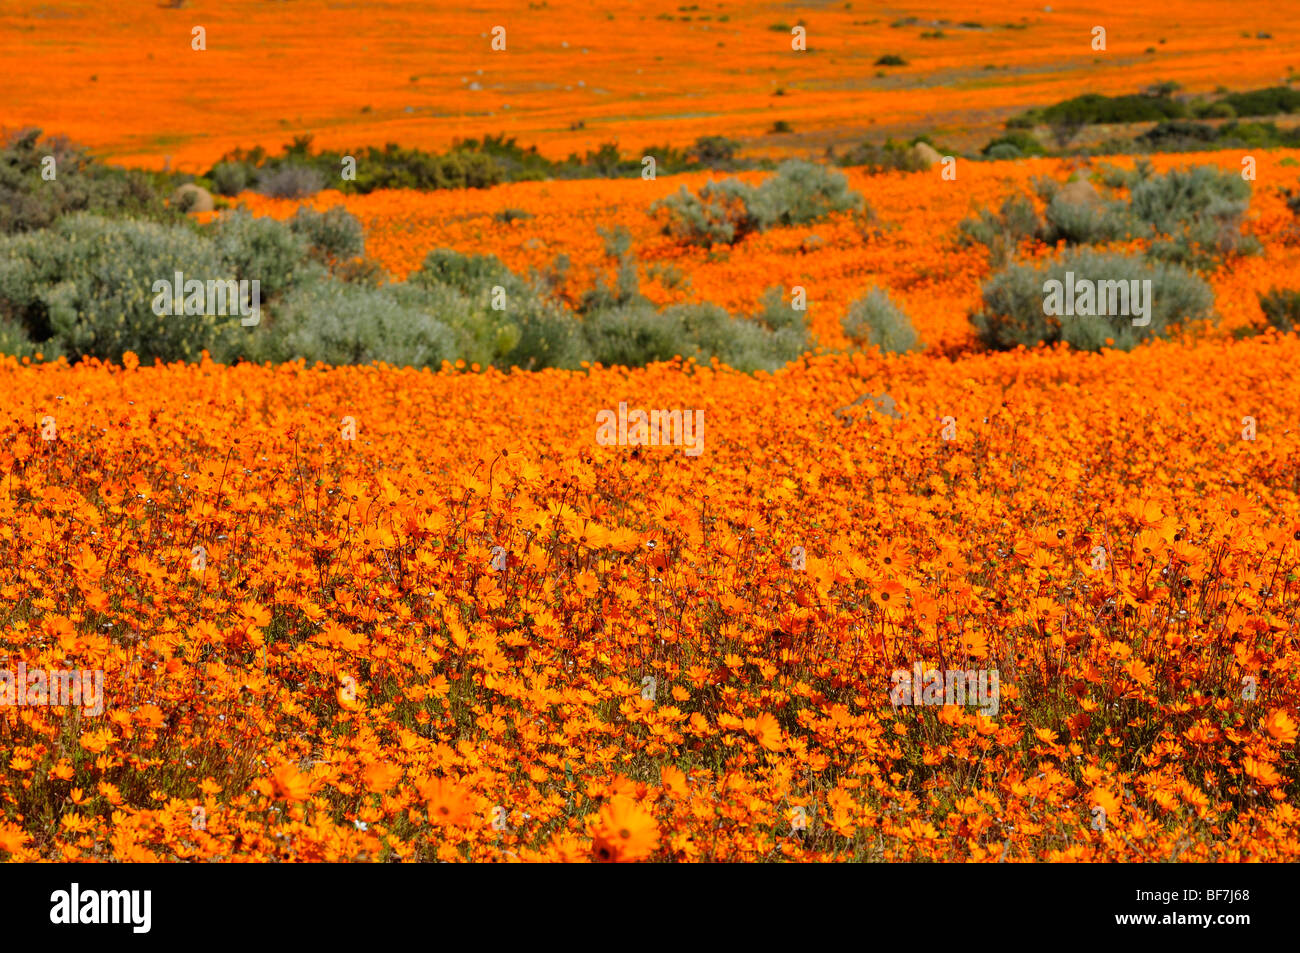 Carpet of spring flowers in Skilpad Nature Reserve near Kamieskron, Namaqualand, South Africa Stock Photo